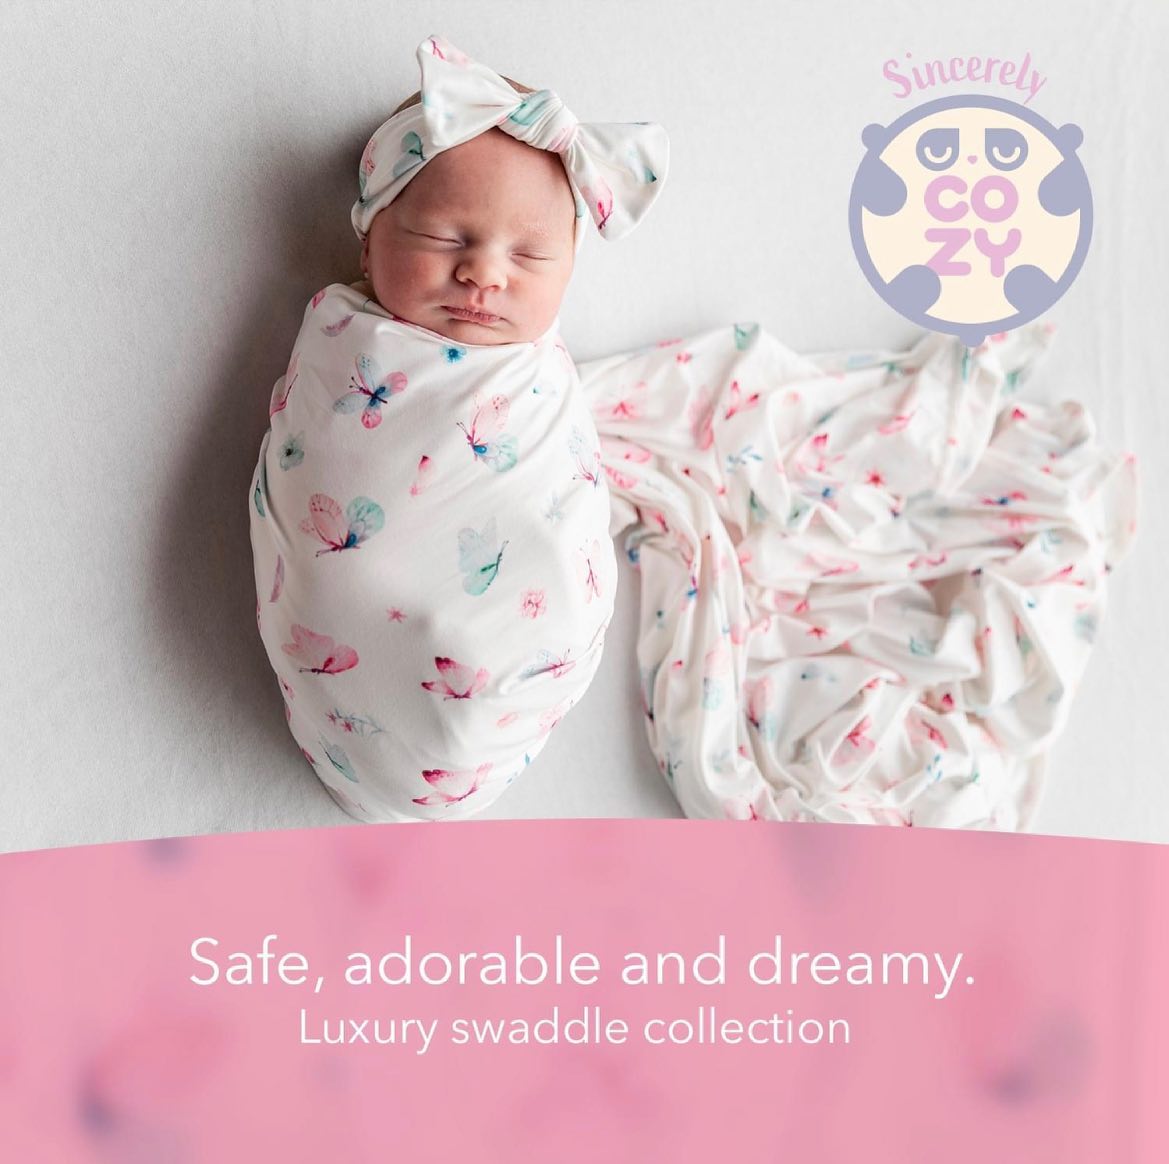 Our exclusive Little Butterfly pattern – Sincerely Cozy